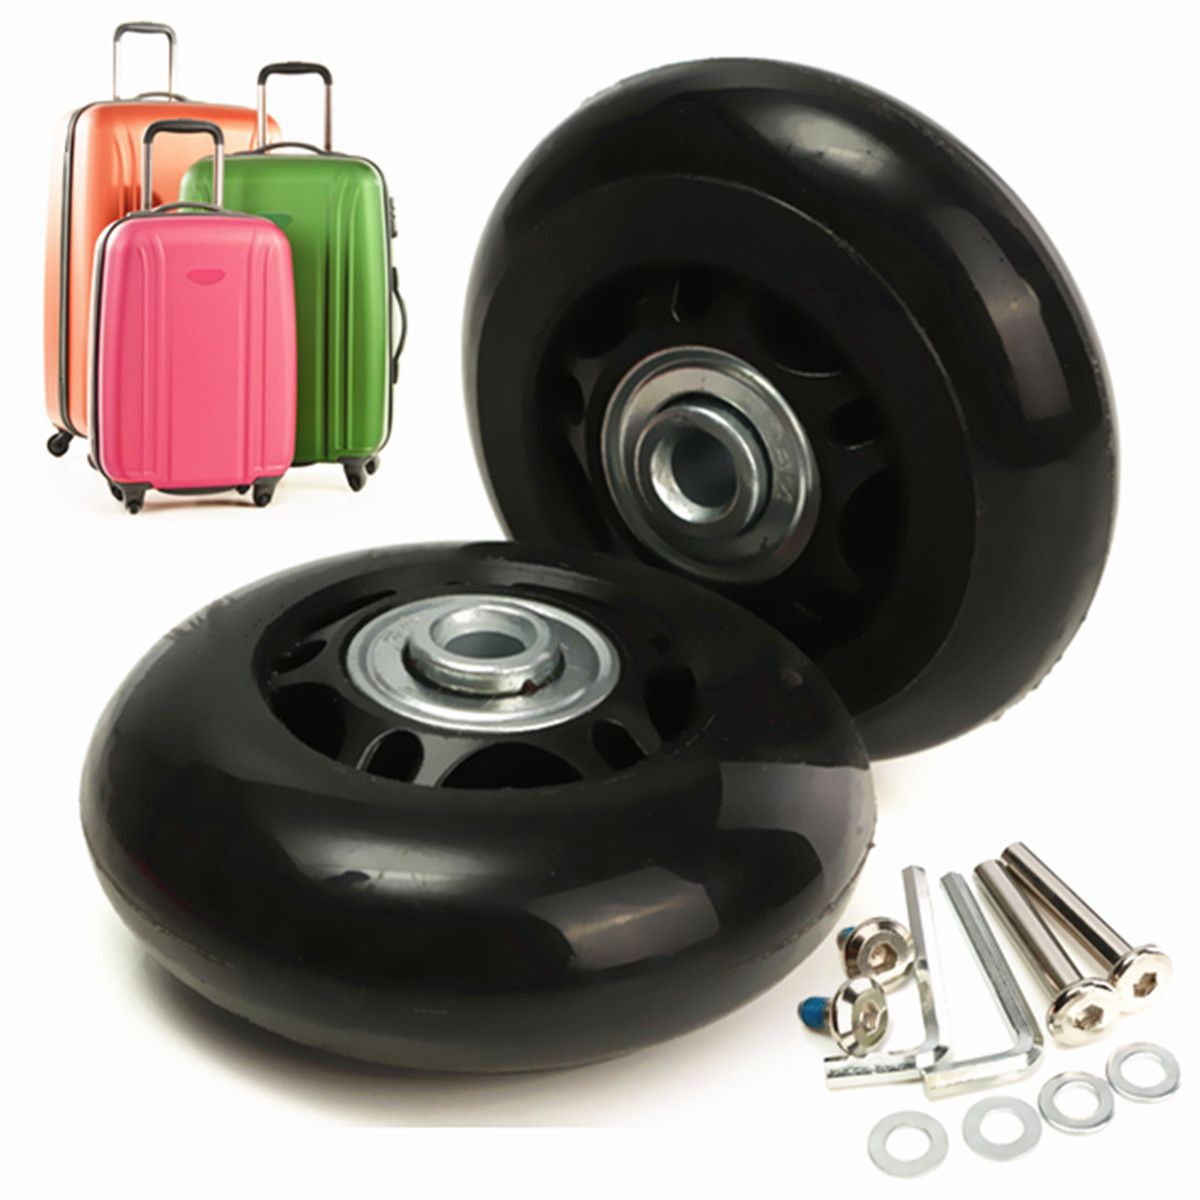 2pcs--Luggage-Suitcase-Replacement-Wheels-Axles-Deluxe-Repair-63times28mm-1041139